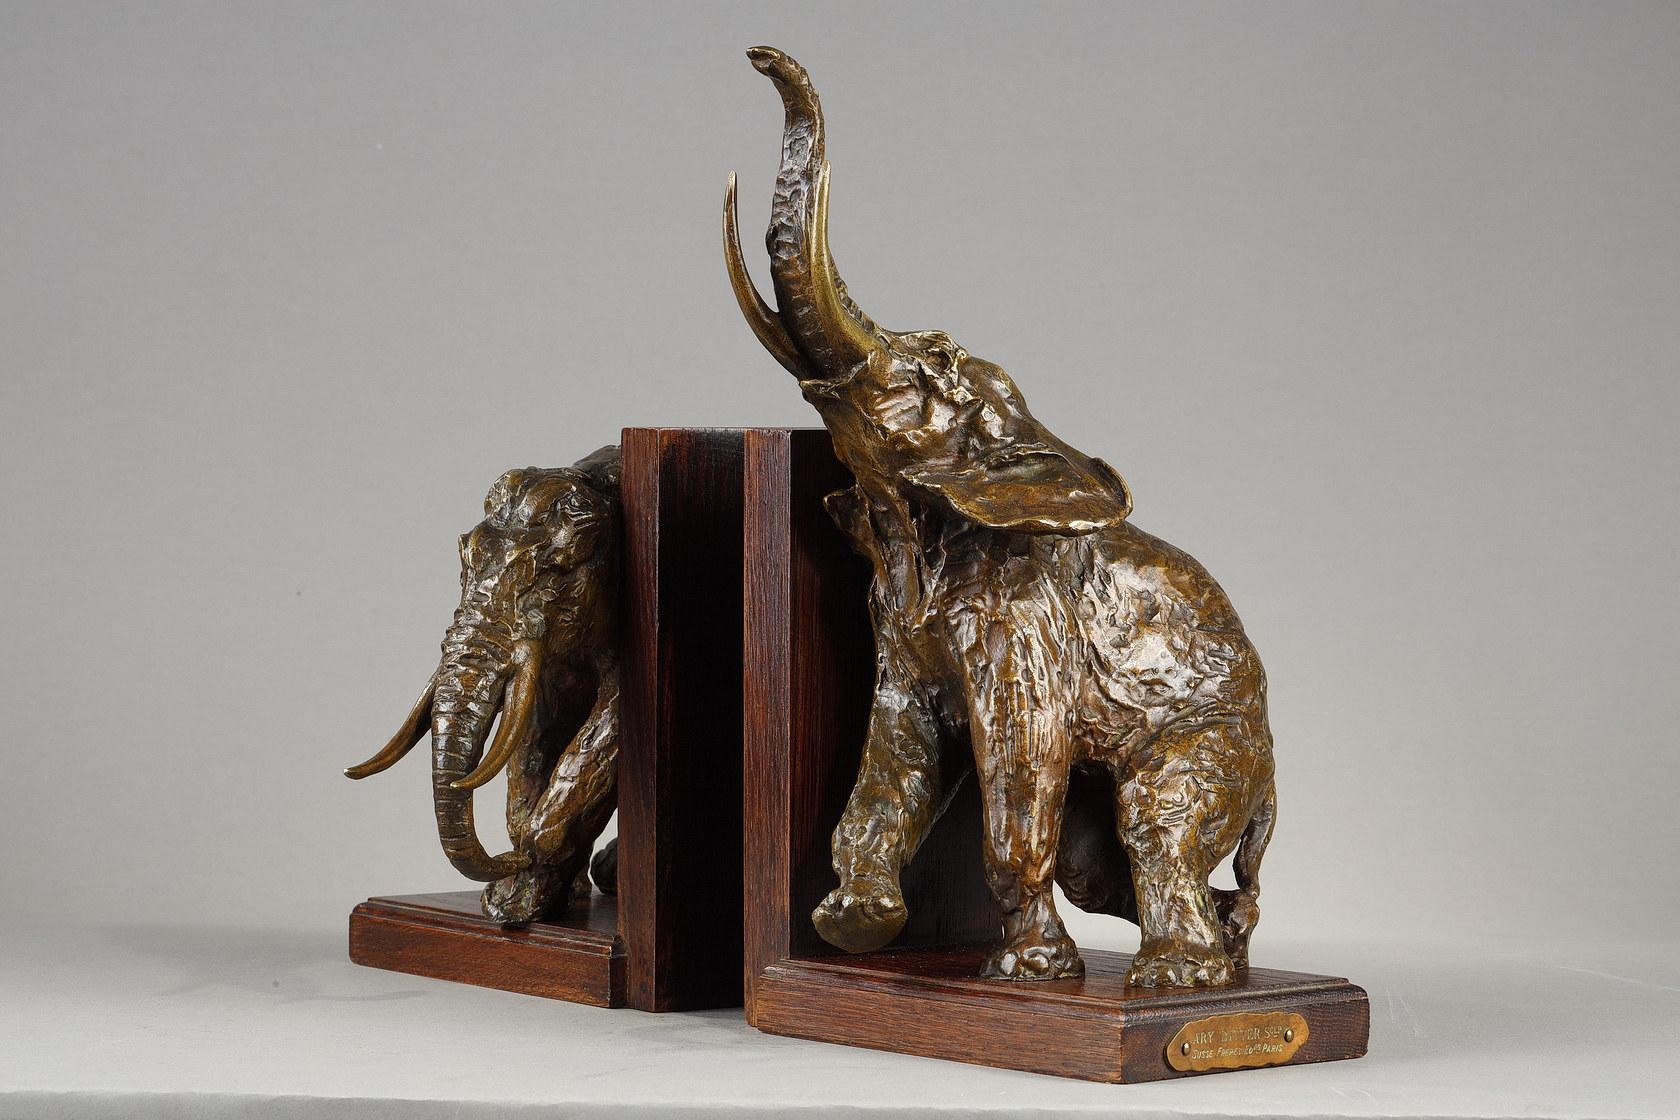 Pair of bookends with Elephants - French School Sculpture by Ary Bitter